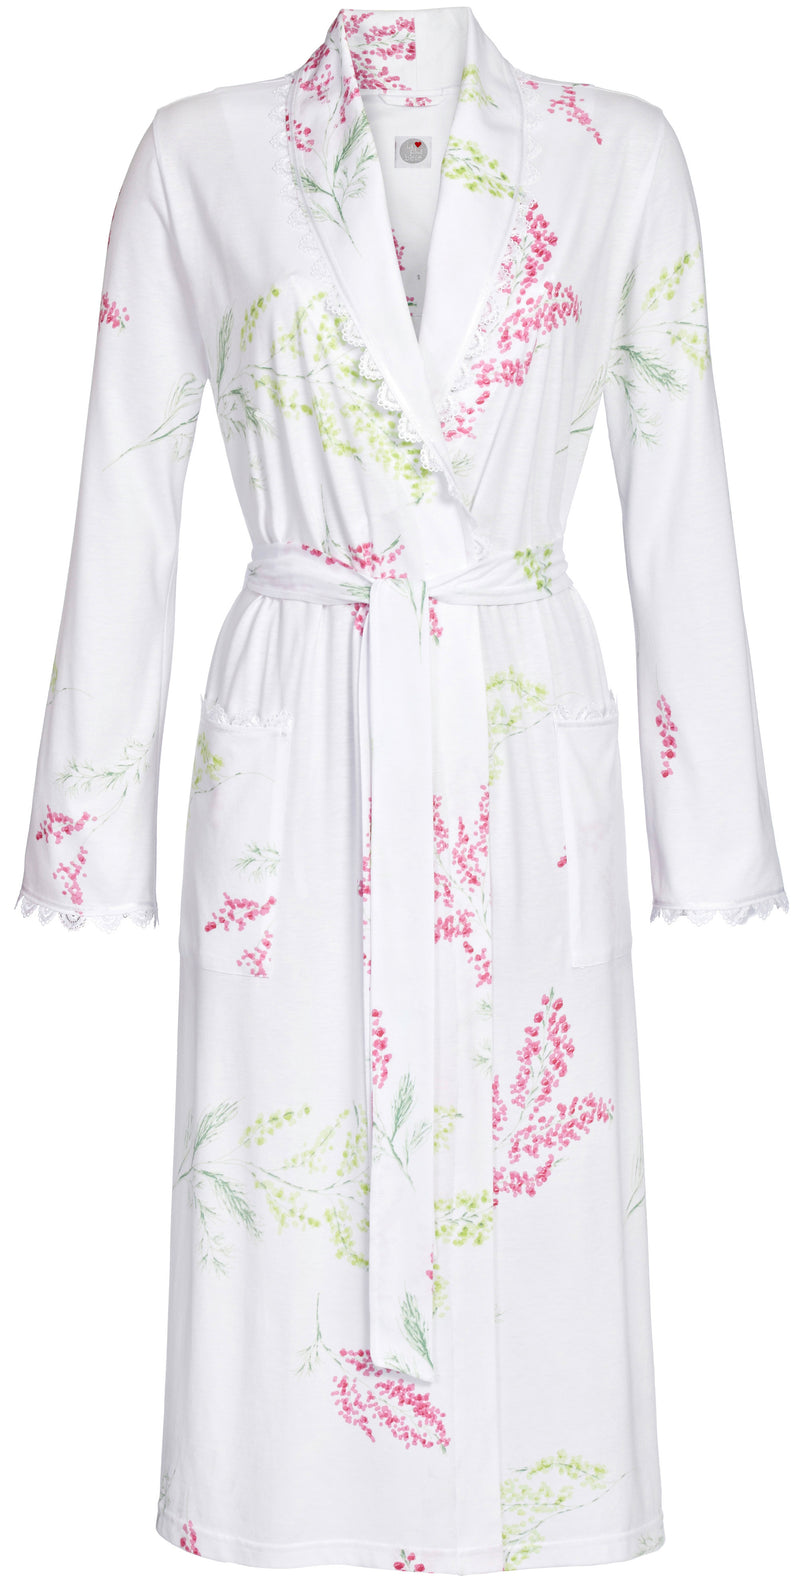 If you're looking for a new, light nightgown and robe for the summer, Ringella has you covered. See Ringella's new designs here.